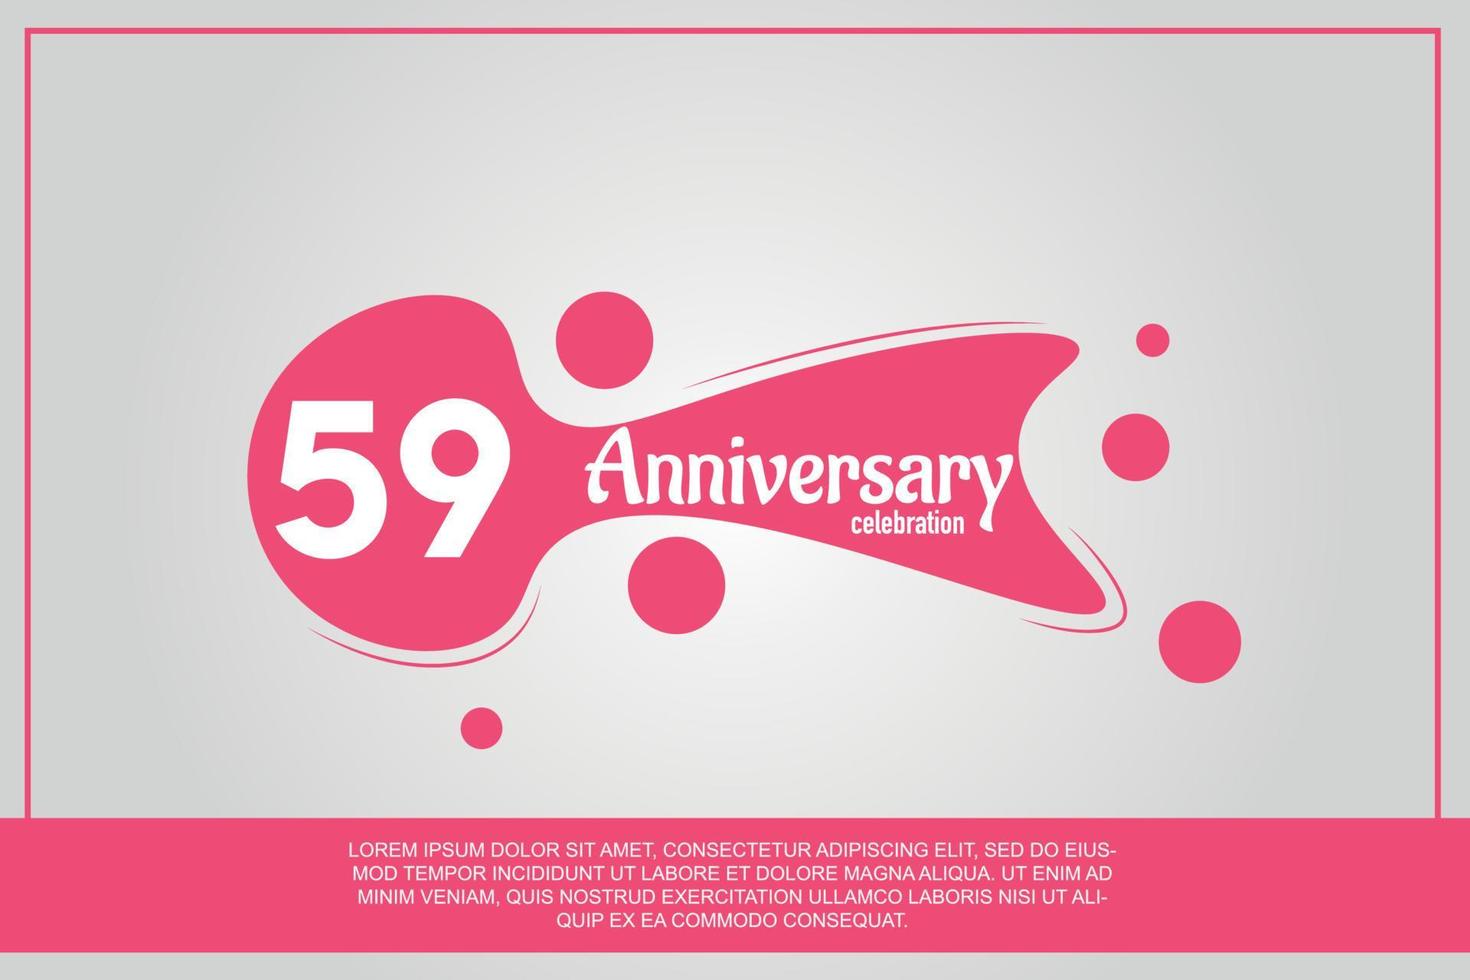 59 year anniversary celebration logo with pink color design with pink color bubbles on gray background vector abstract illustration